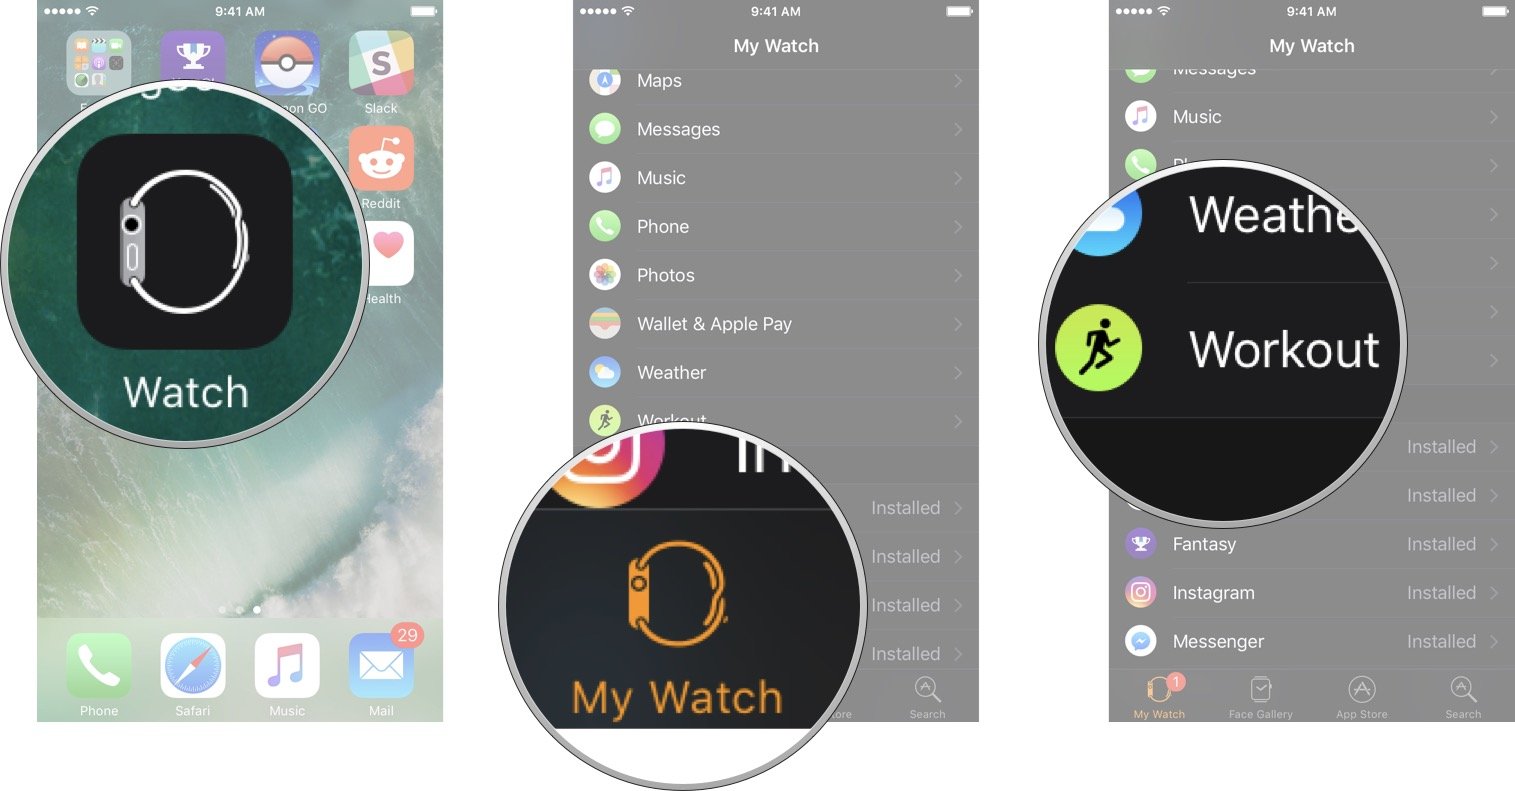 Show a metric in Workouts on Apple Watch:Launch the Apple Watch app from the Home screen of your iPhone, tap the My Watch tab, and then tap Workout.